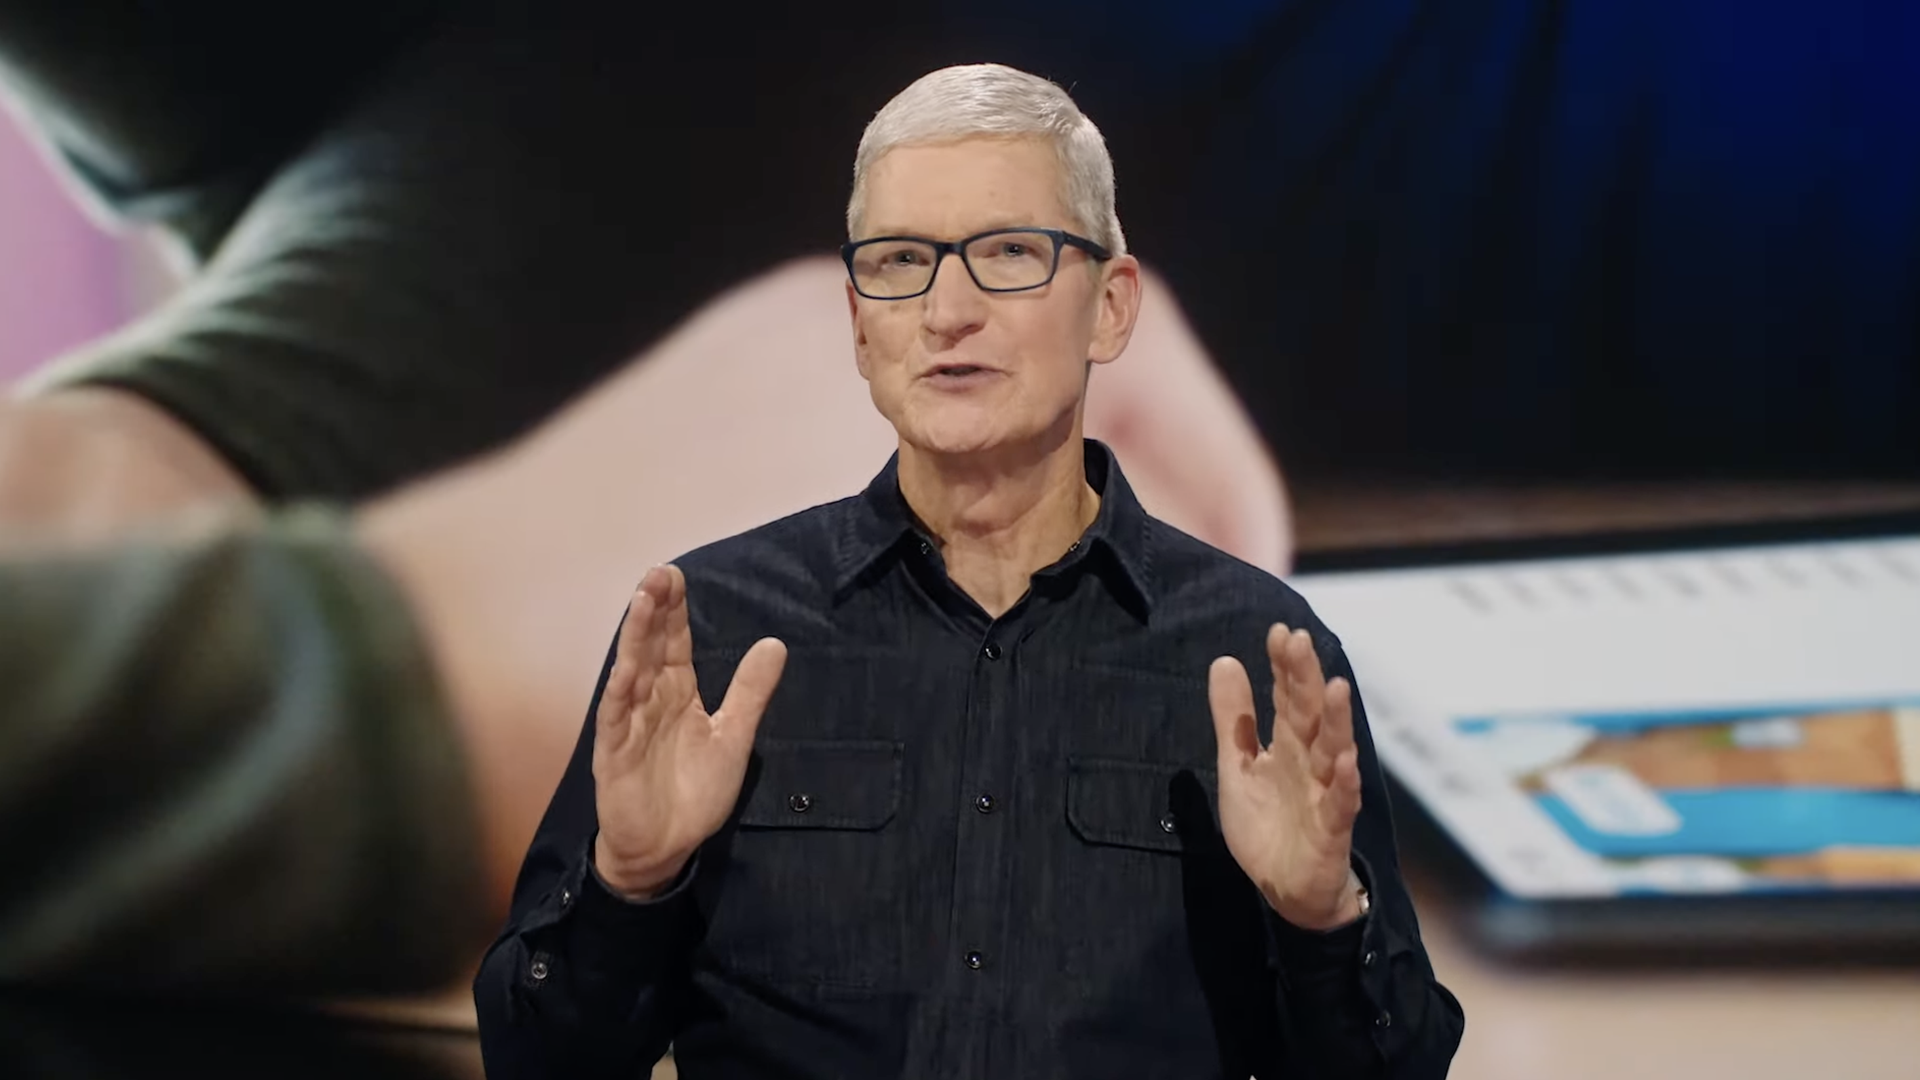 Apple CEO Tim Cook, speaking at the online Worldwide Developer Conference 2021.